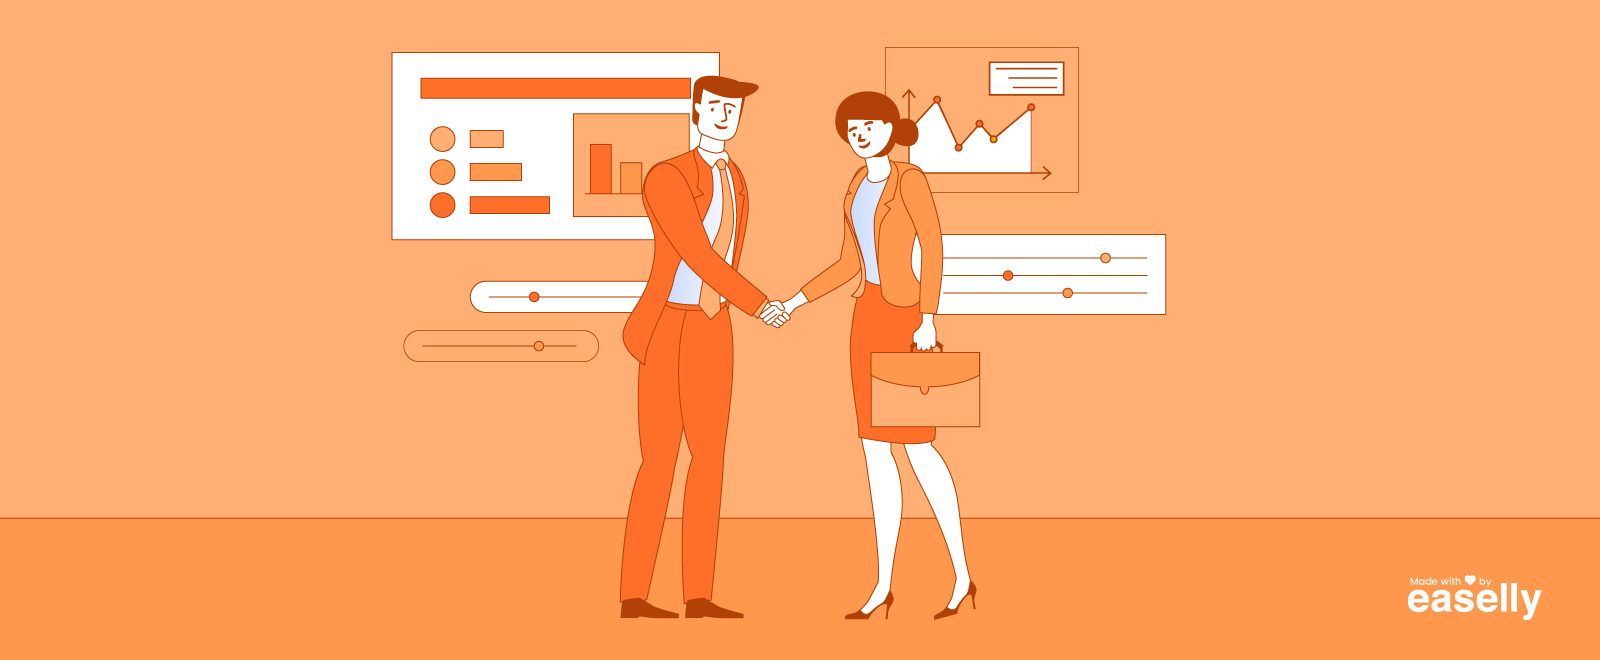 illustration of two b2b marketers